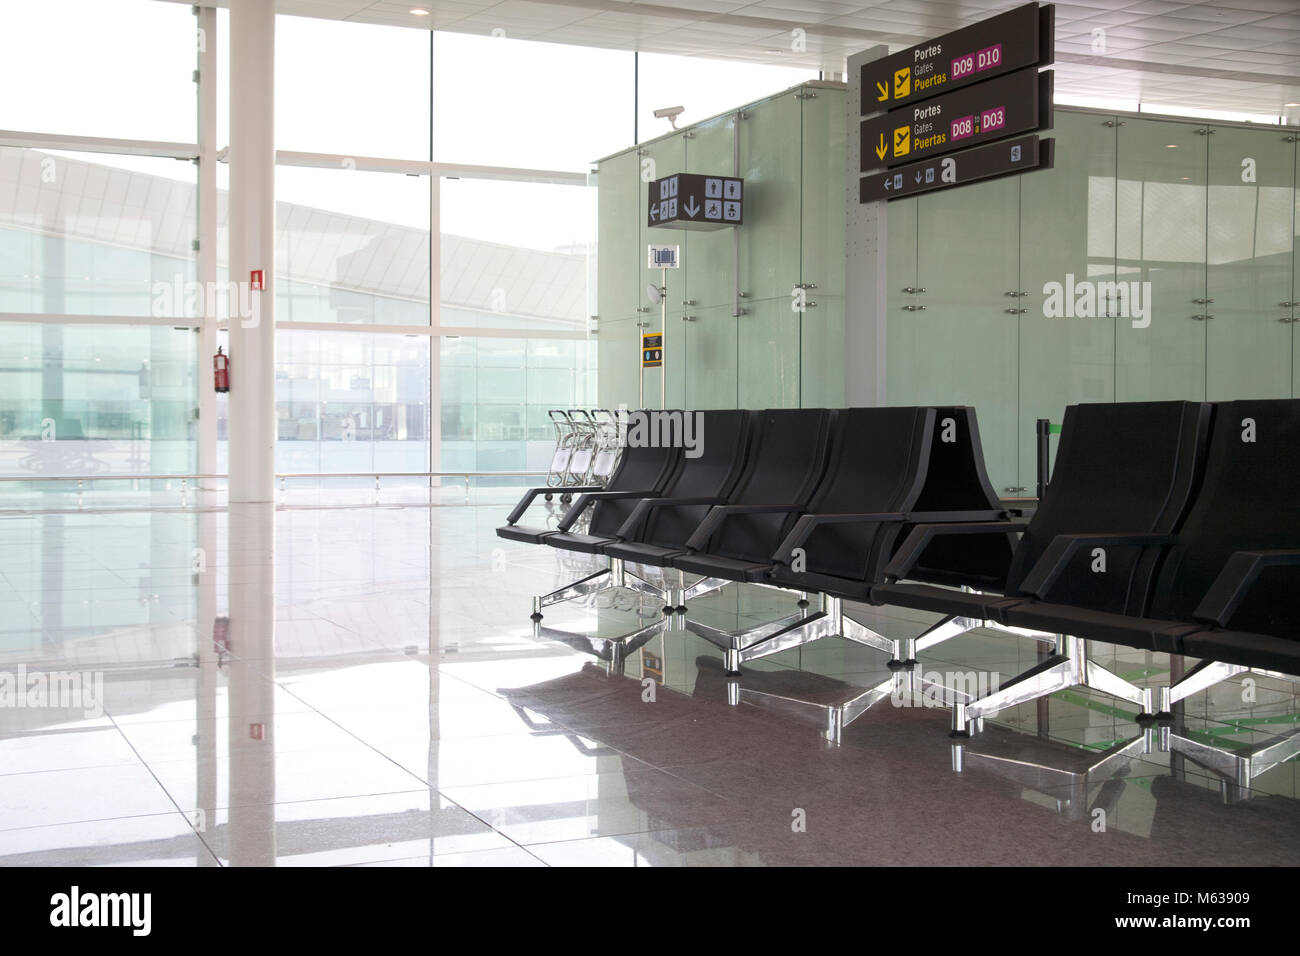 Seats at the gate in Barcelona airport Stock Photo